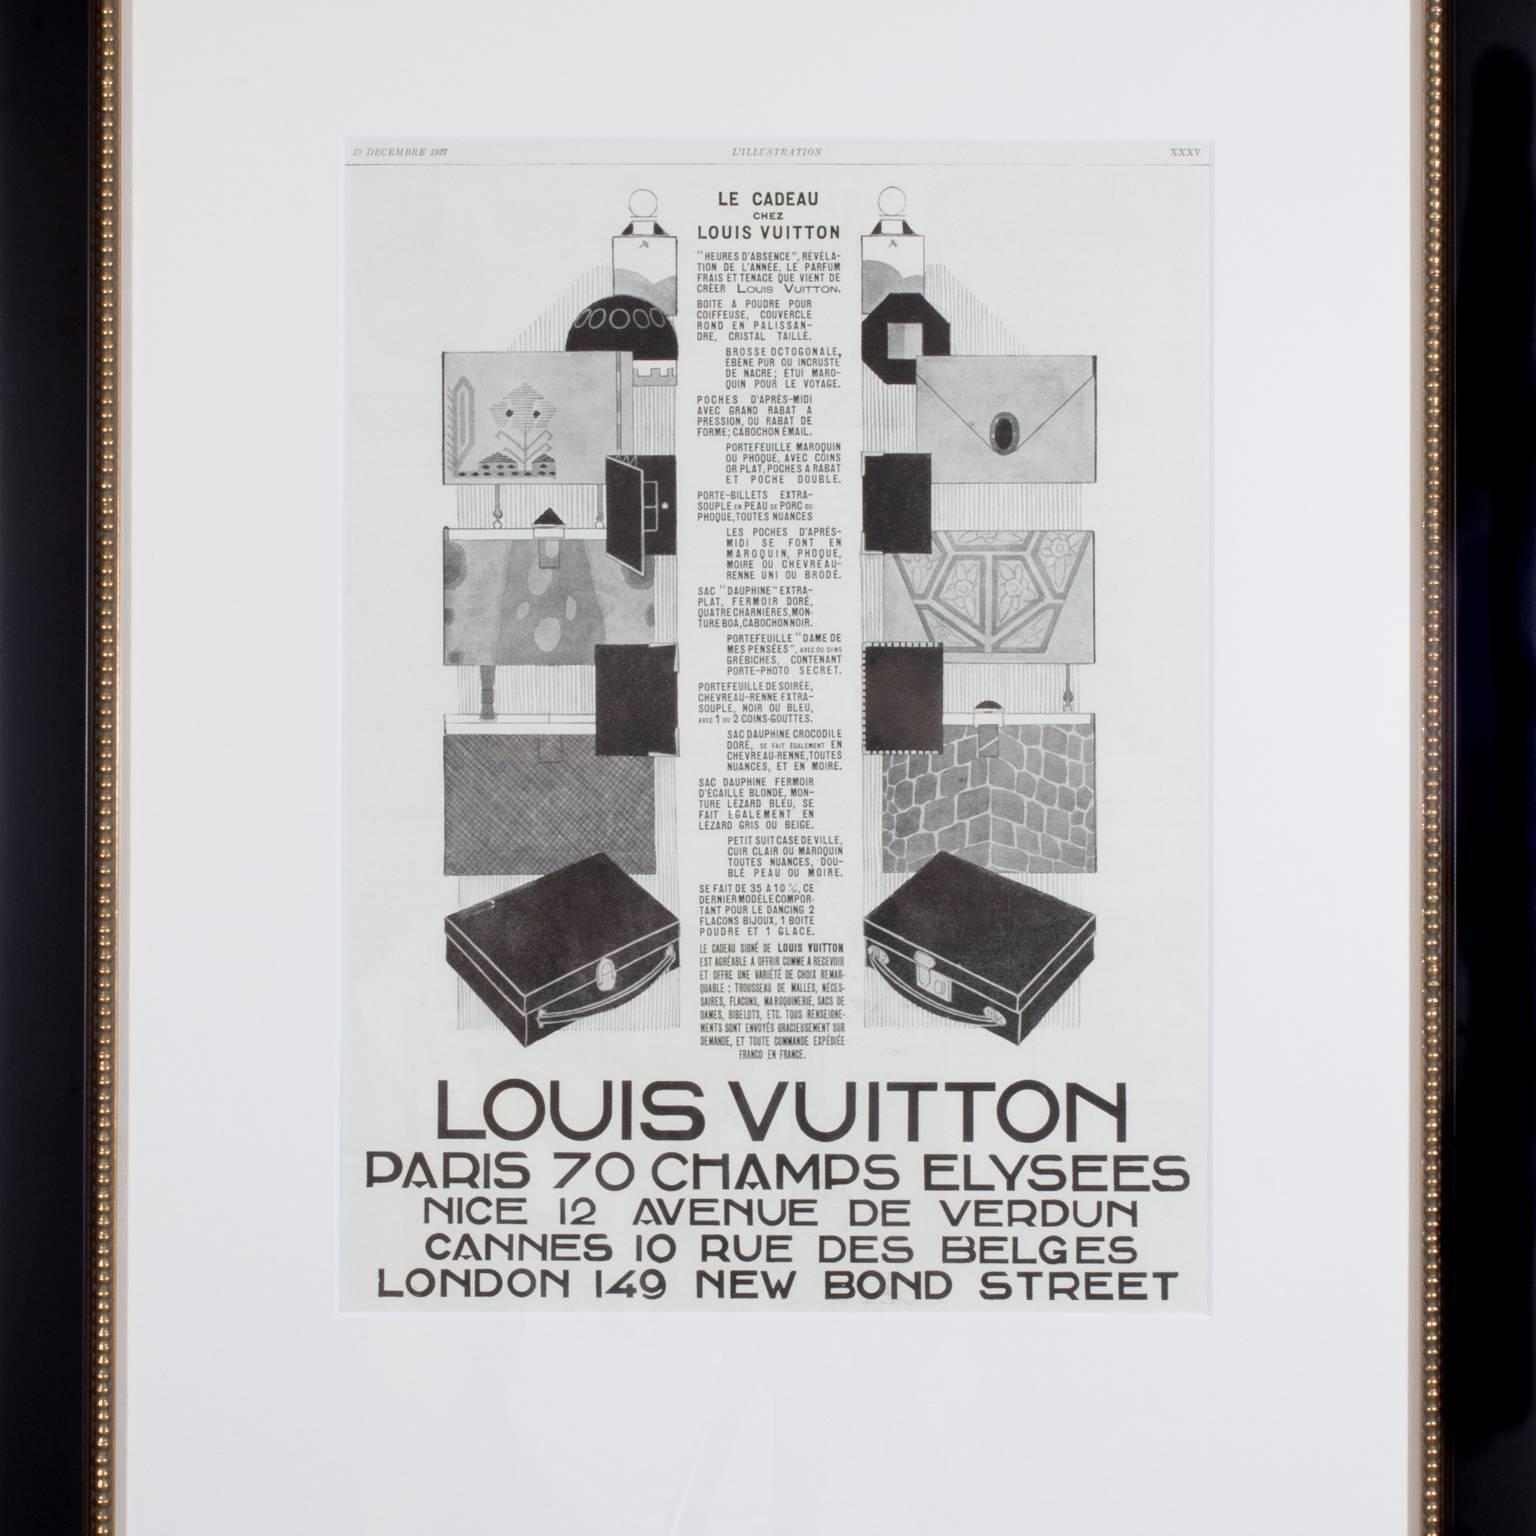 Discovered during our time perusing the Parisian puces markets, this is an original vintage French advertisement from the 1930's.  Framed in a subtle black frame with delicate gold beading at edge of glass.  The Louis Vuitton brand is the epitome of